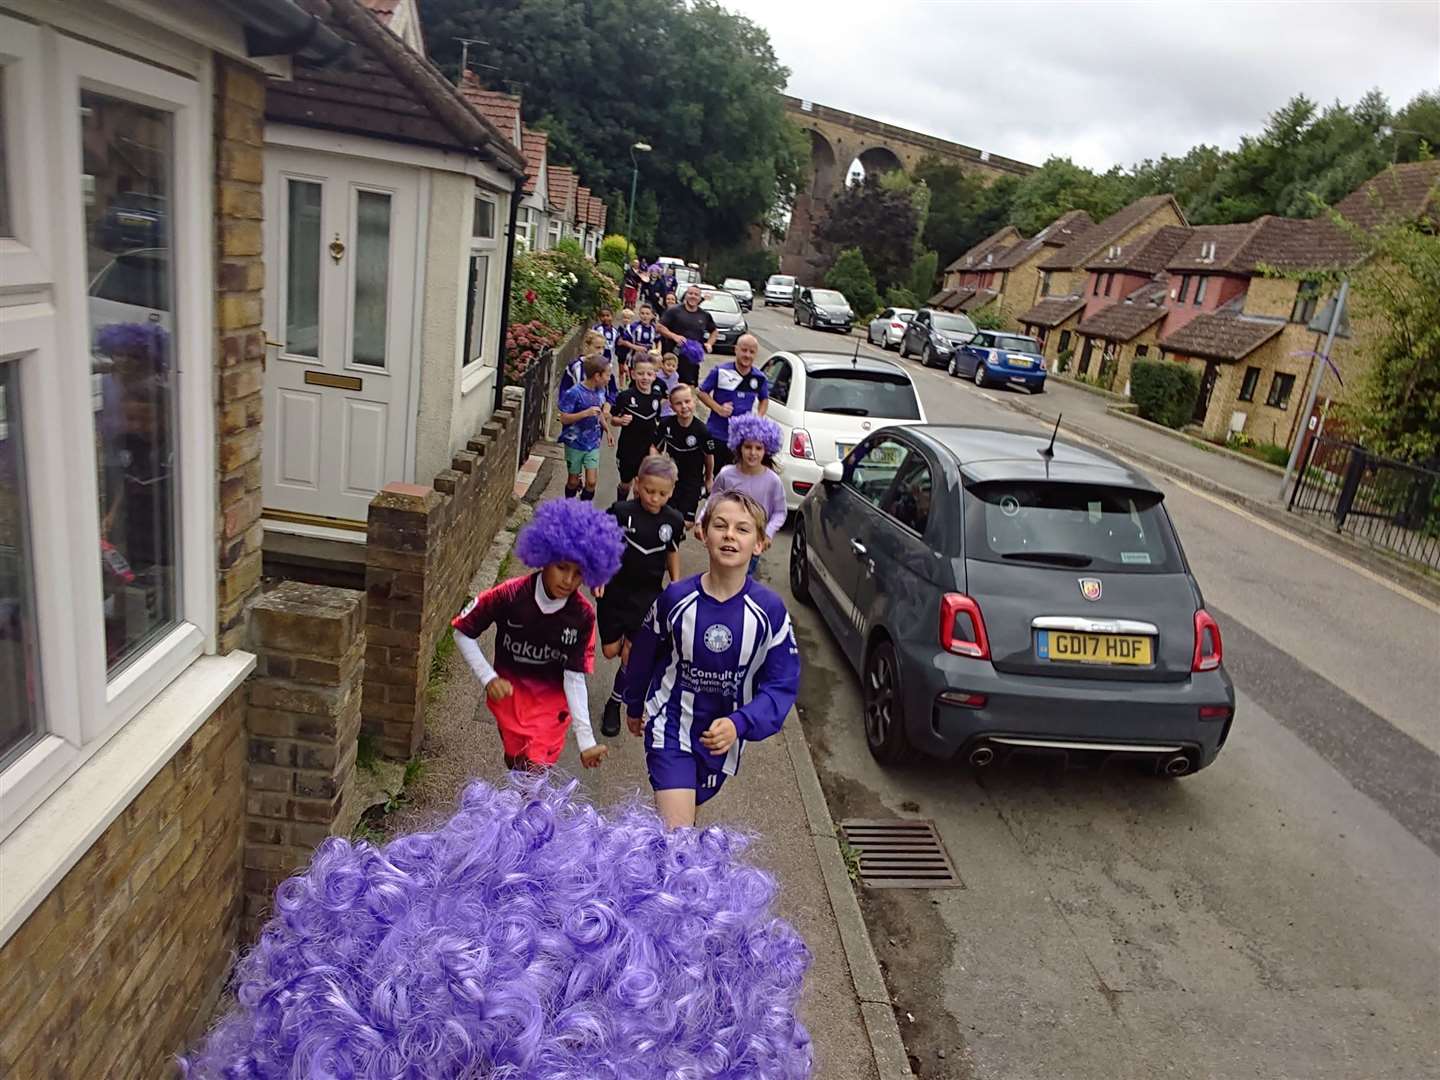 The boys from South Darent Junior football club run through the village with their coaches (16377259).